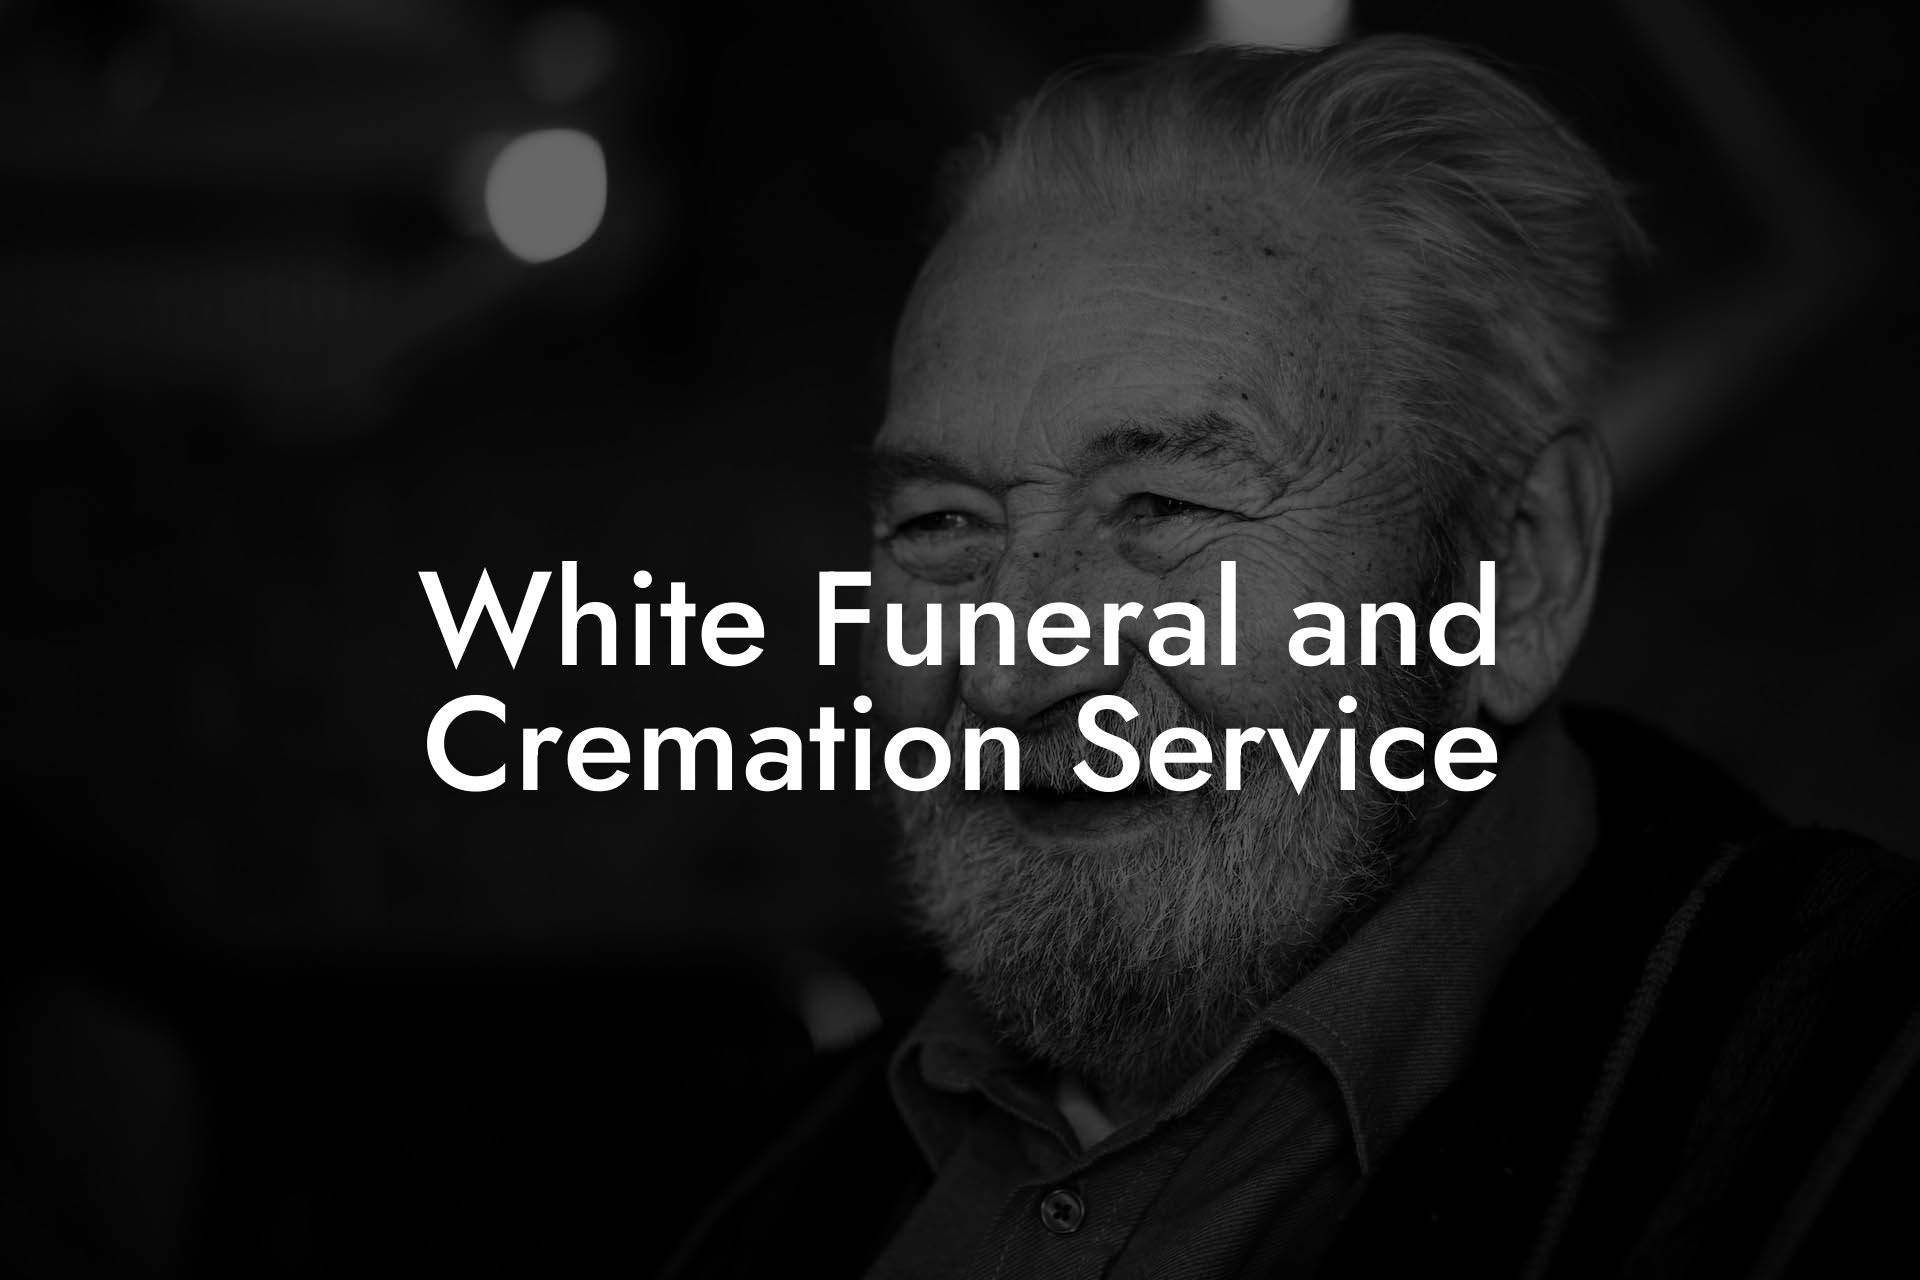 White Funeral and Cremation Service